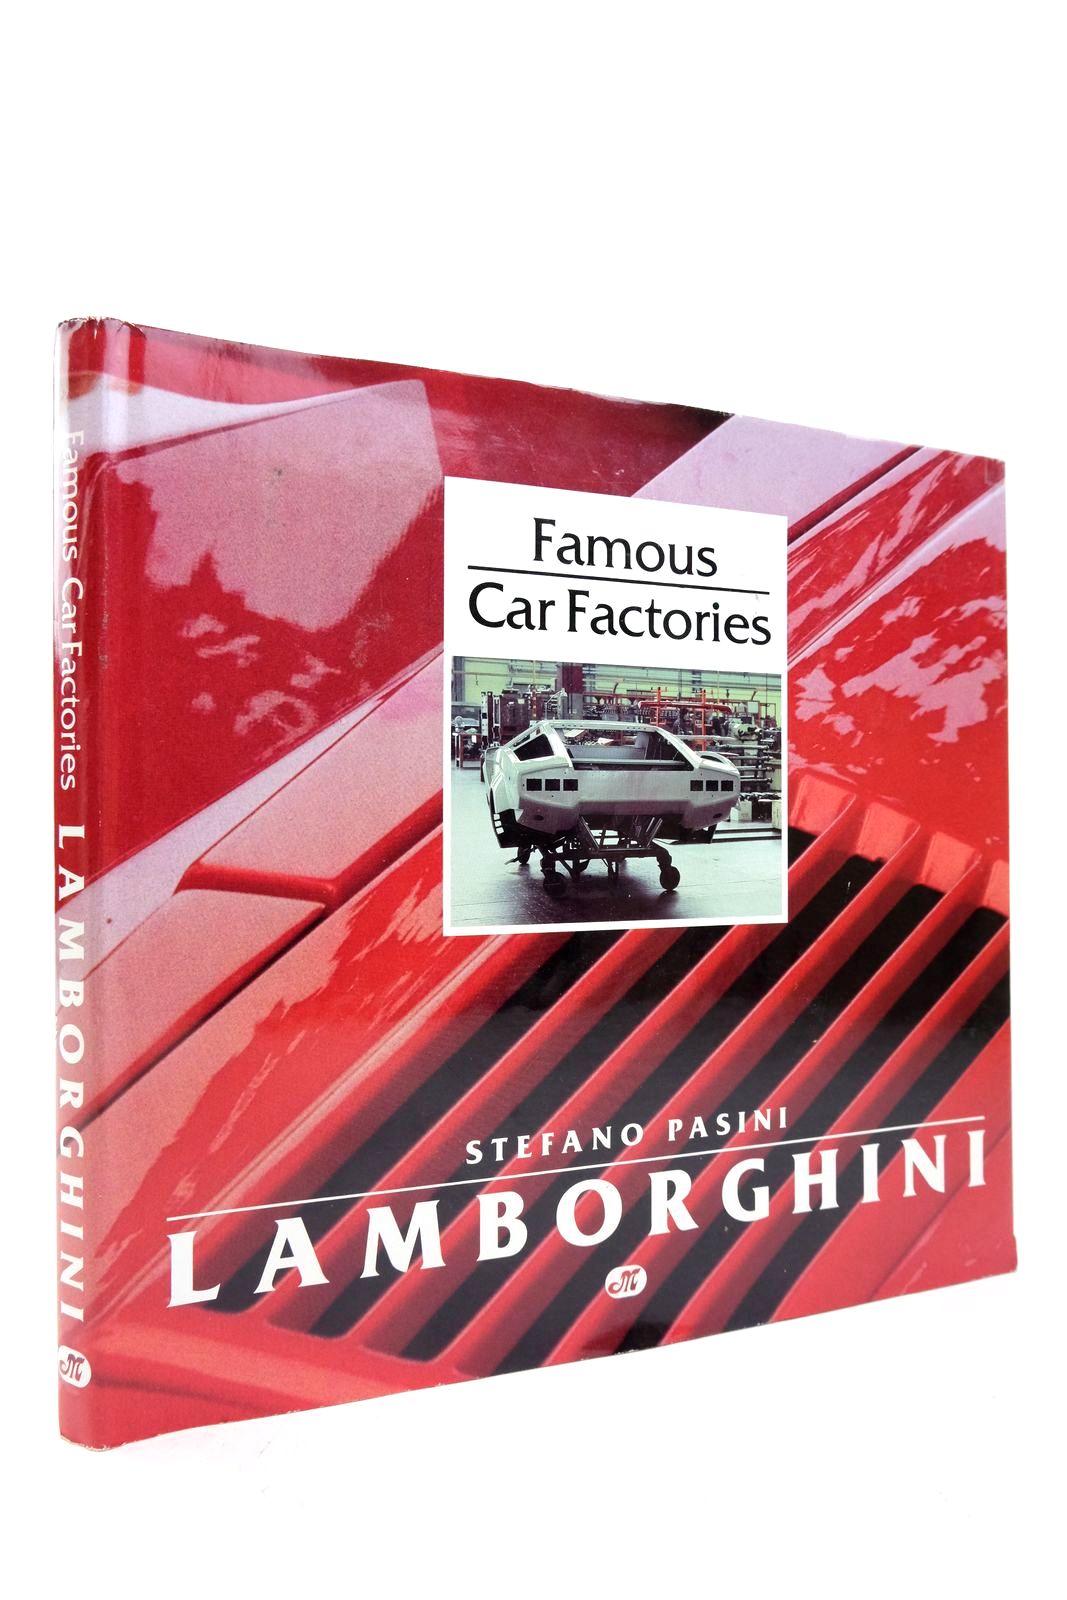 Photo of FAMOUS CAR FACTORIES: LAMBORGHINI written by Pasini, Stefano published by Motorbooks International (STOCK CODE: 2139383)  for sale by Stella & Rose's Books